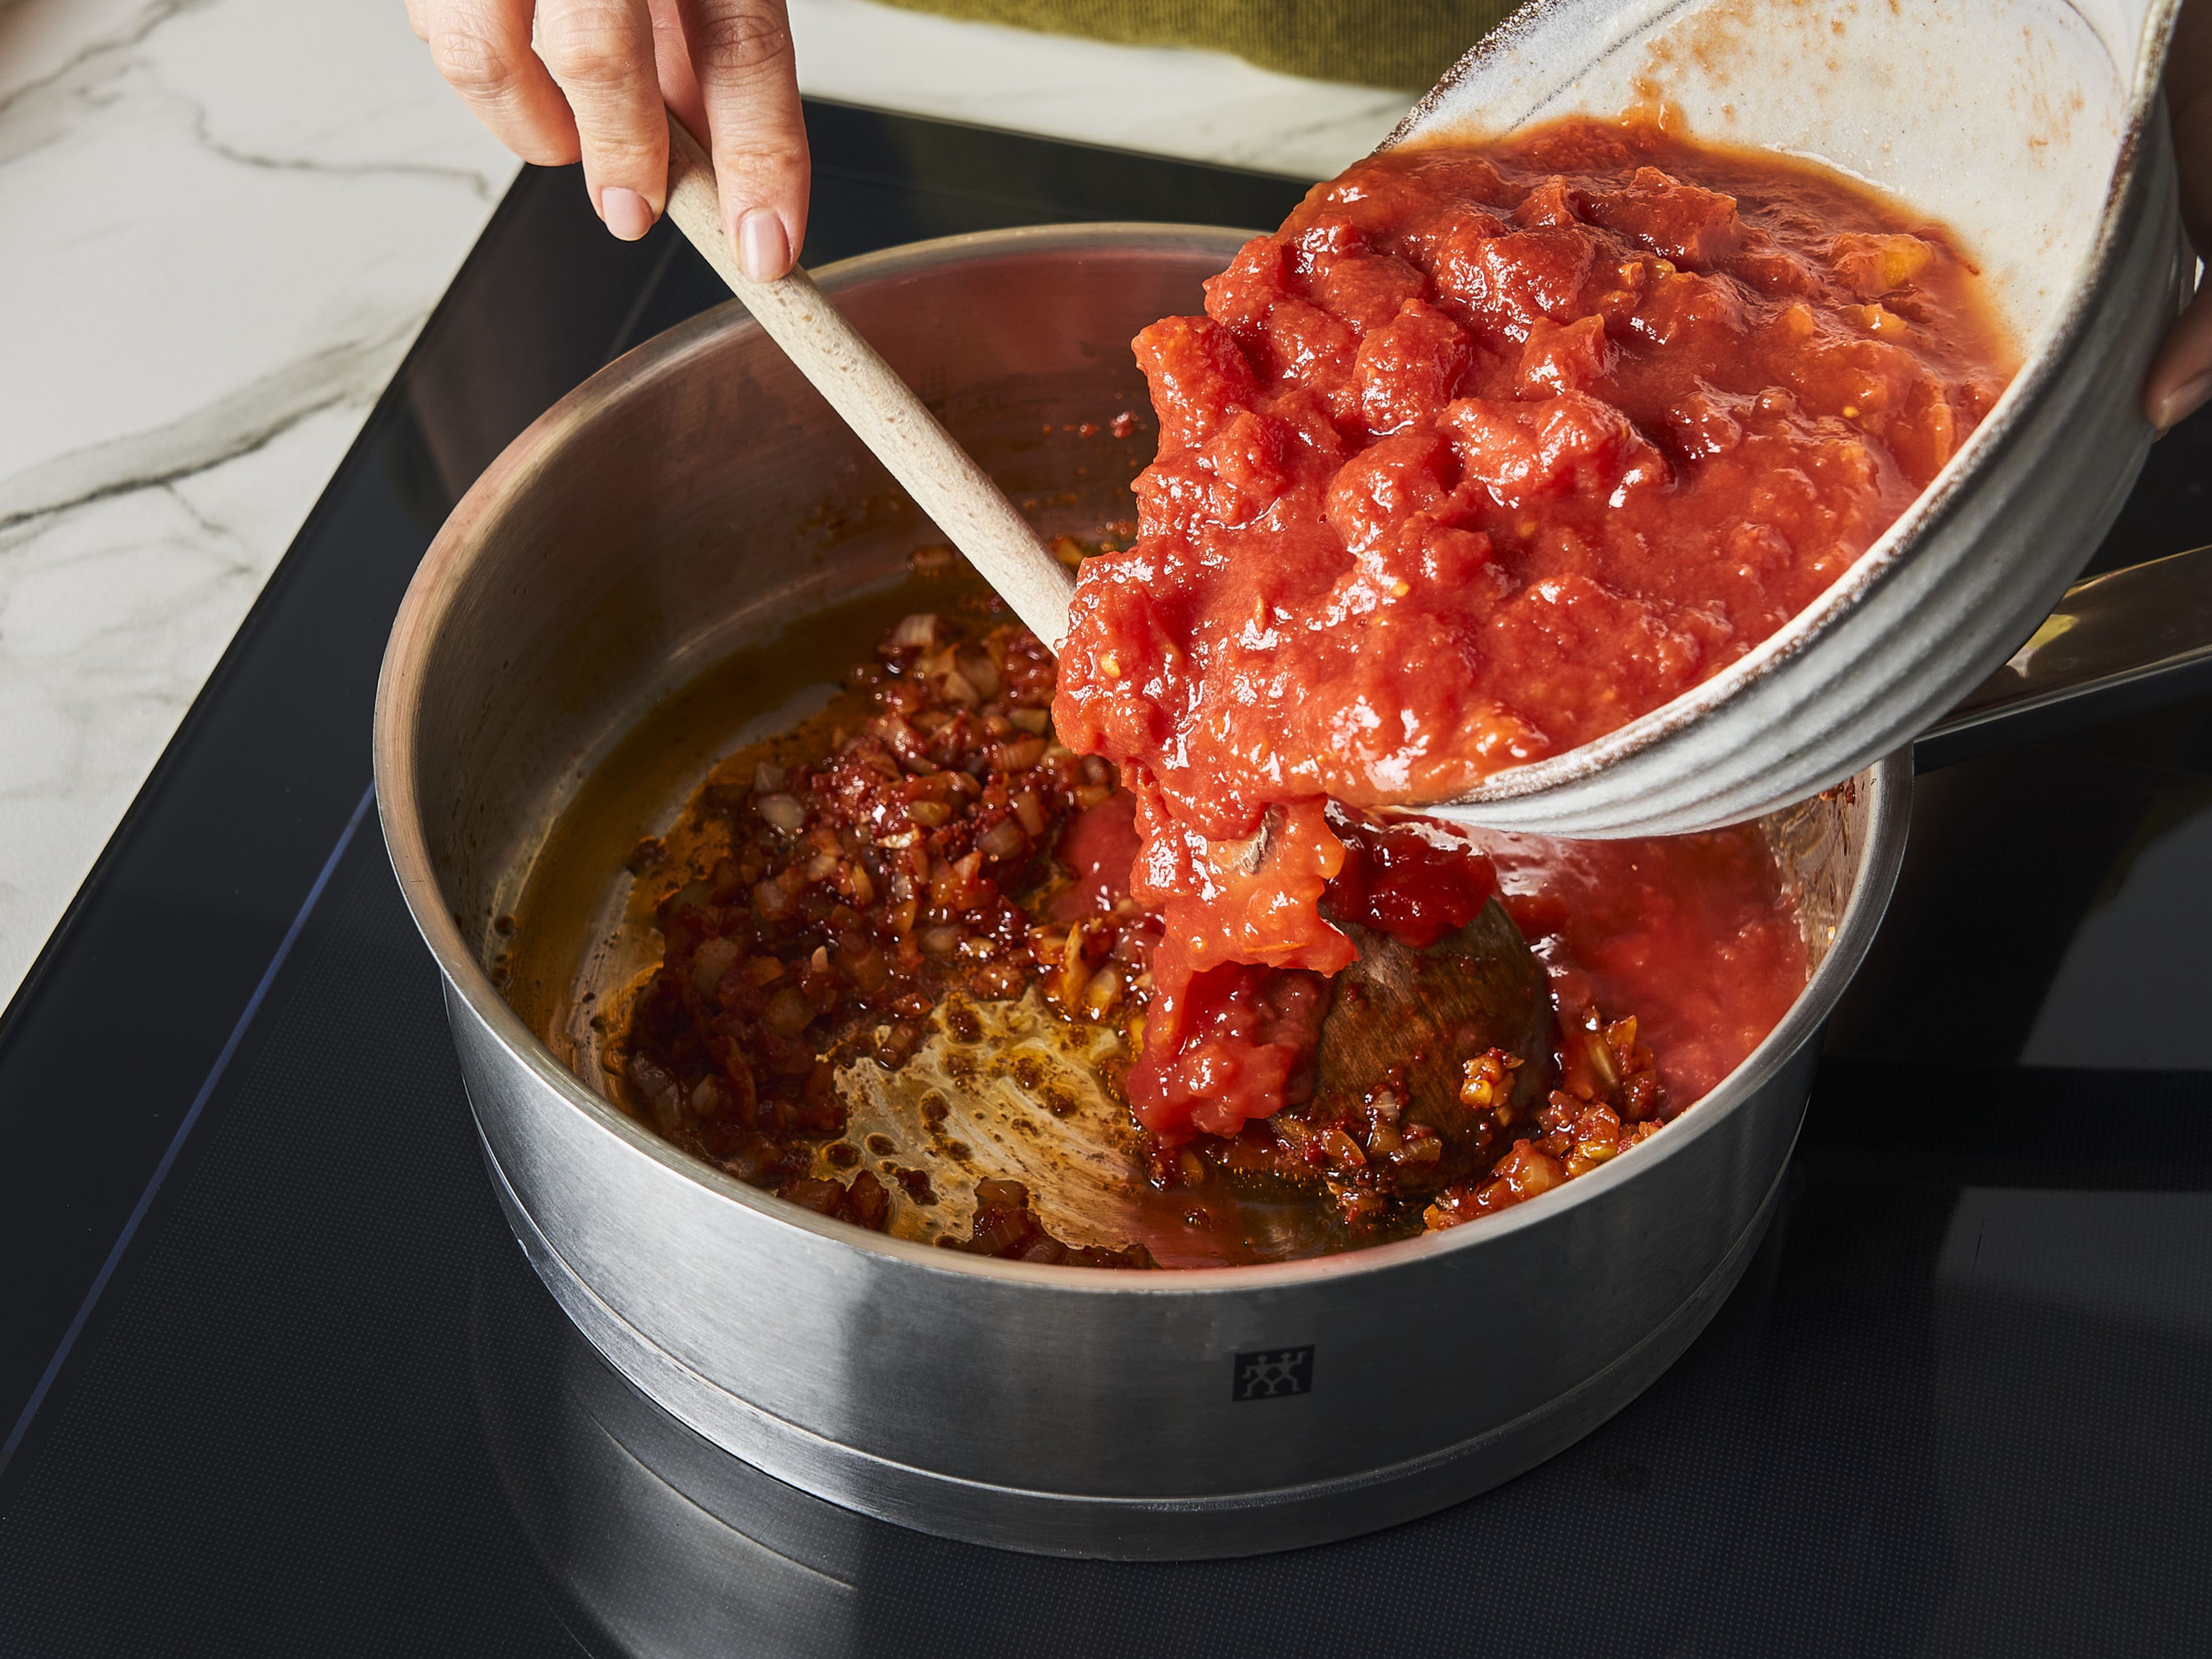 Add the canned tomatoes to the pan and bring to a boil. Add salt, pepper, oregano, thyme and rosemary to the tomato sauce. Let simmer for approx. 10–15 min.